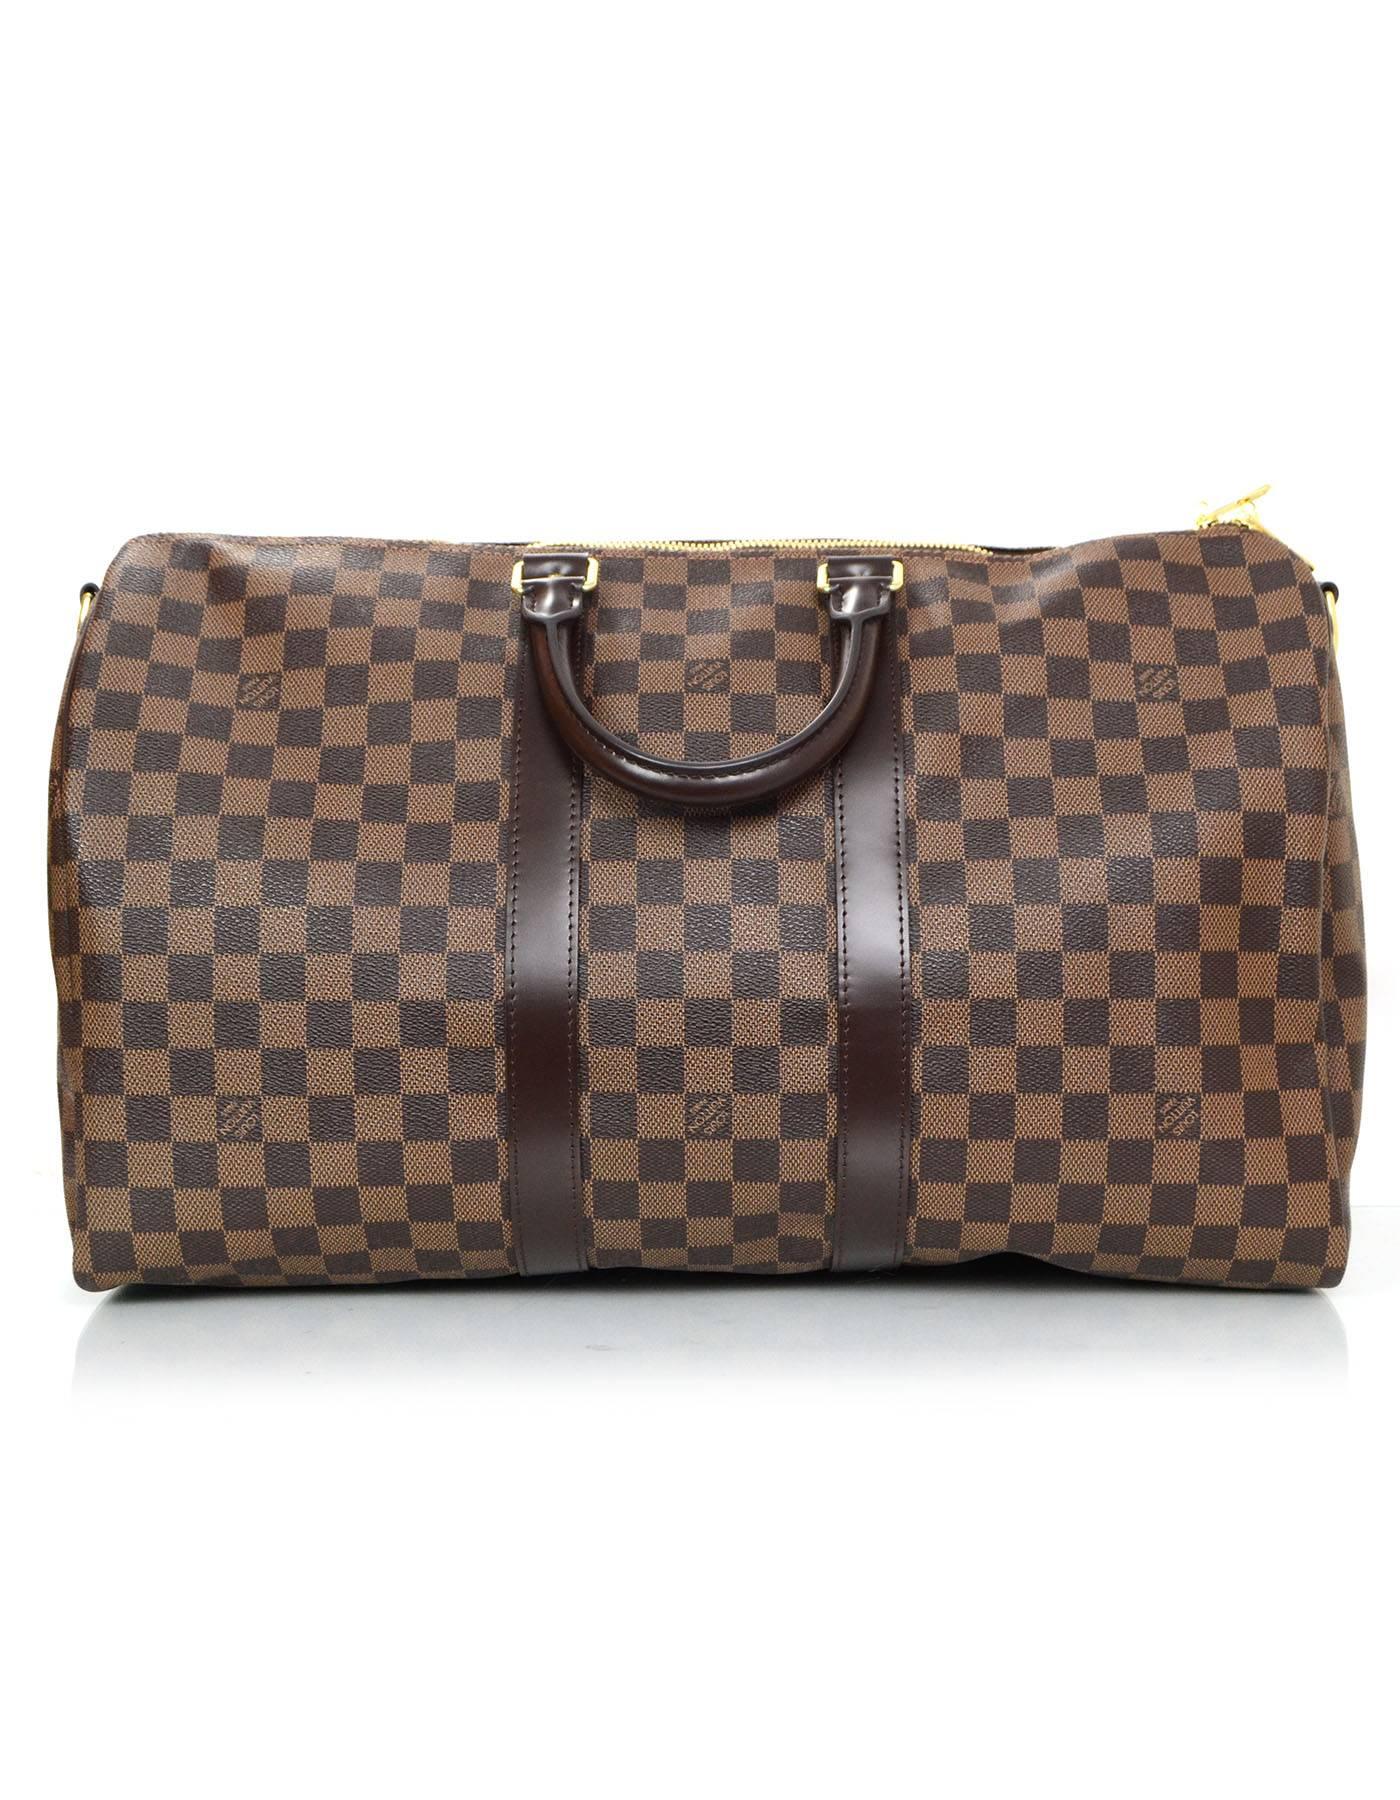 Louis Vuitton Damier Keepall Bandouliere 45 In Excellent Condition In New York, NY